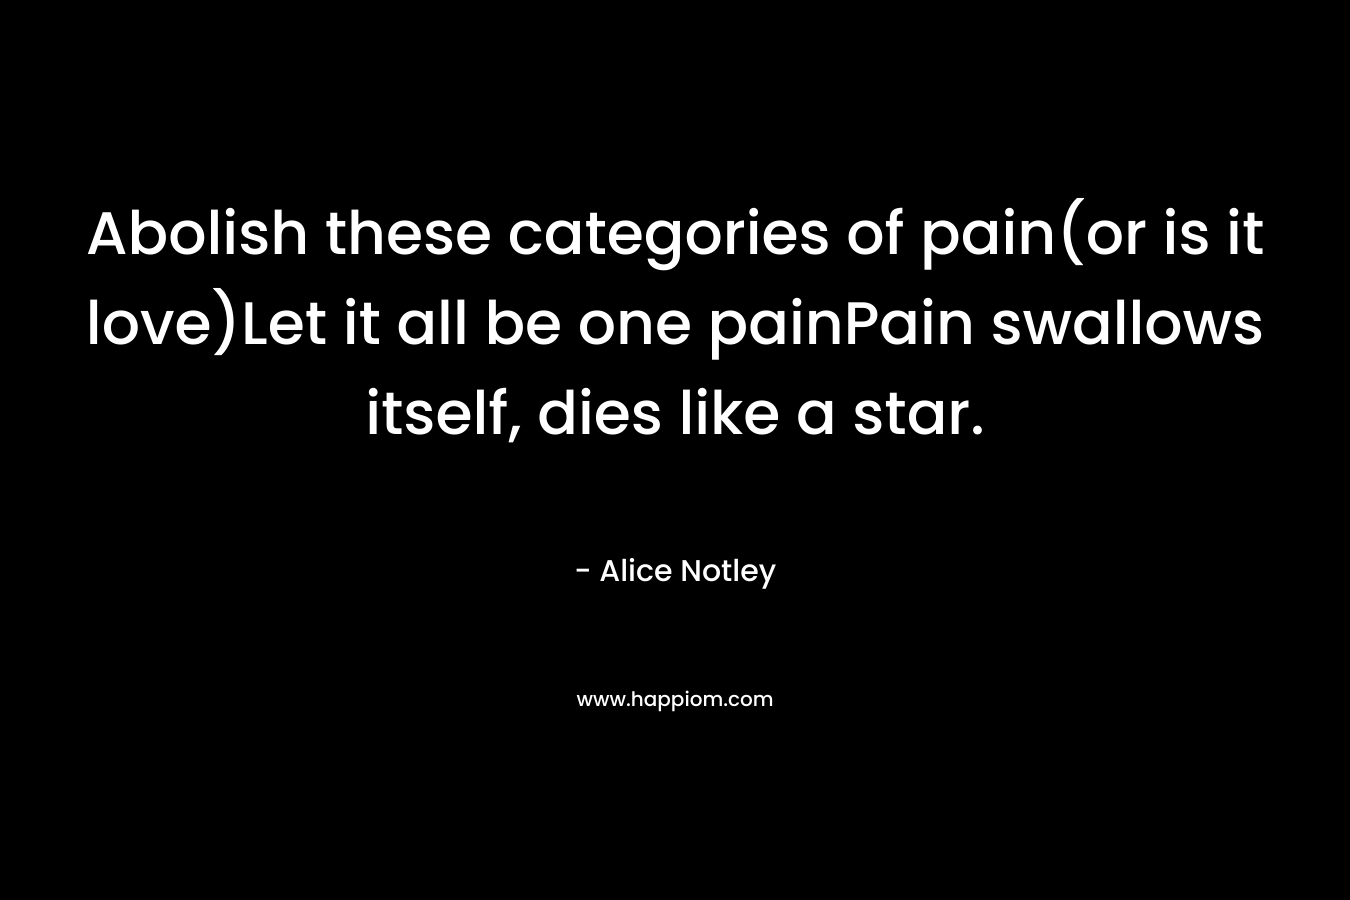 Abolish these categories of pain(or is it love)Let it all be one painPain swallows itself, dies like a star. – Alice Notley